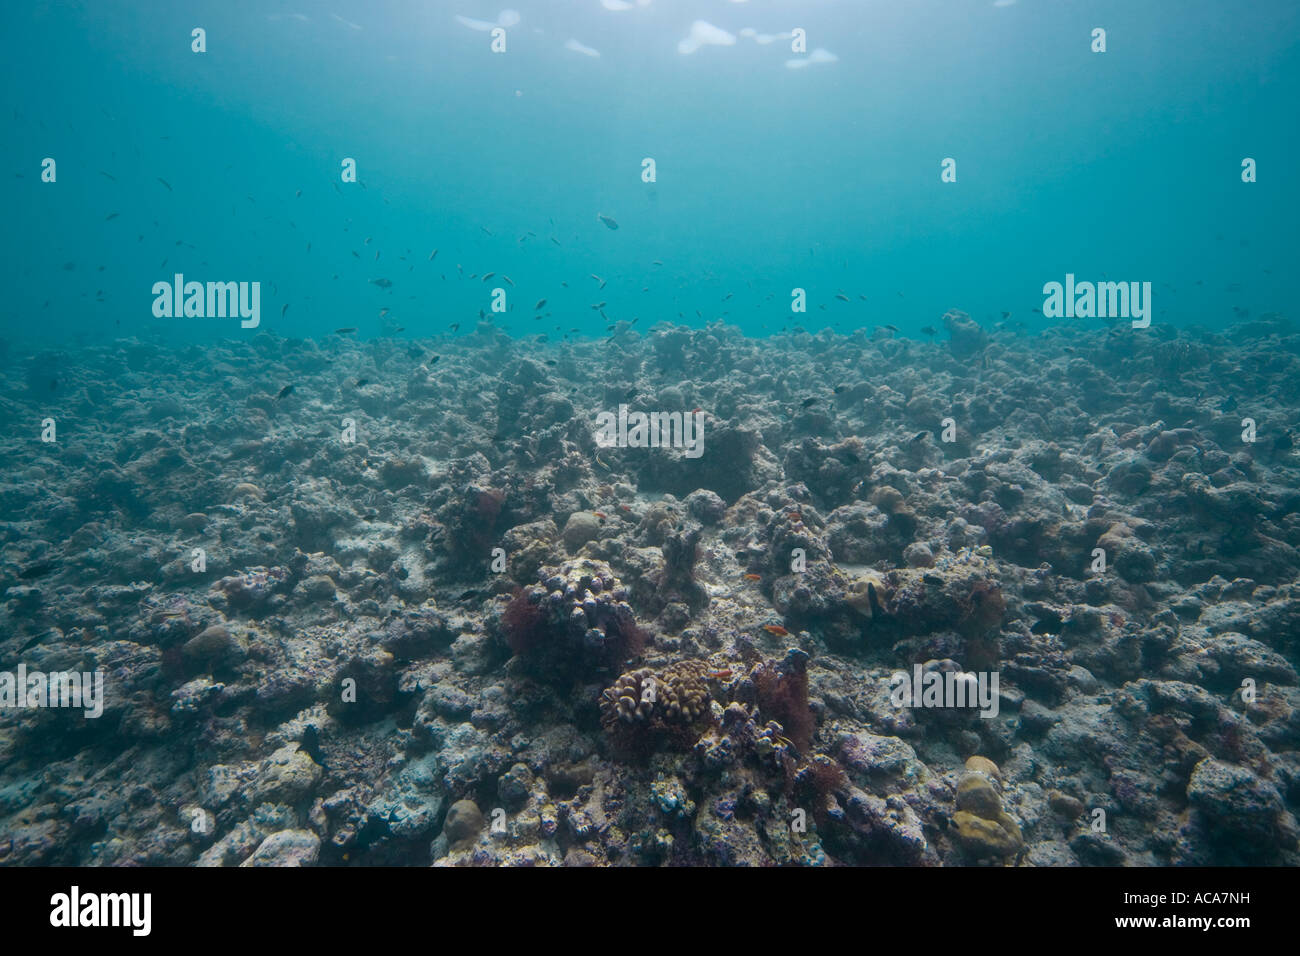 Coral reef damaged by global warming, Maldives, Indian Ocean Stock Photo